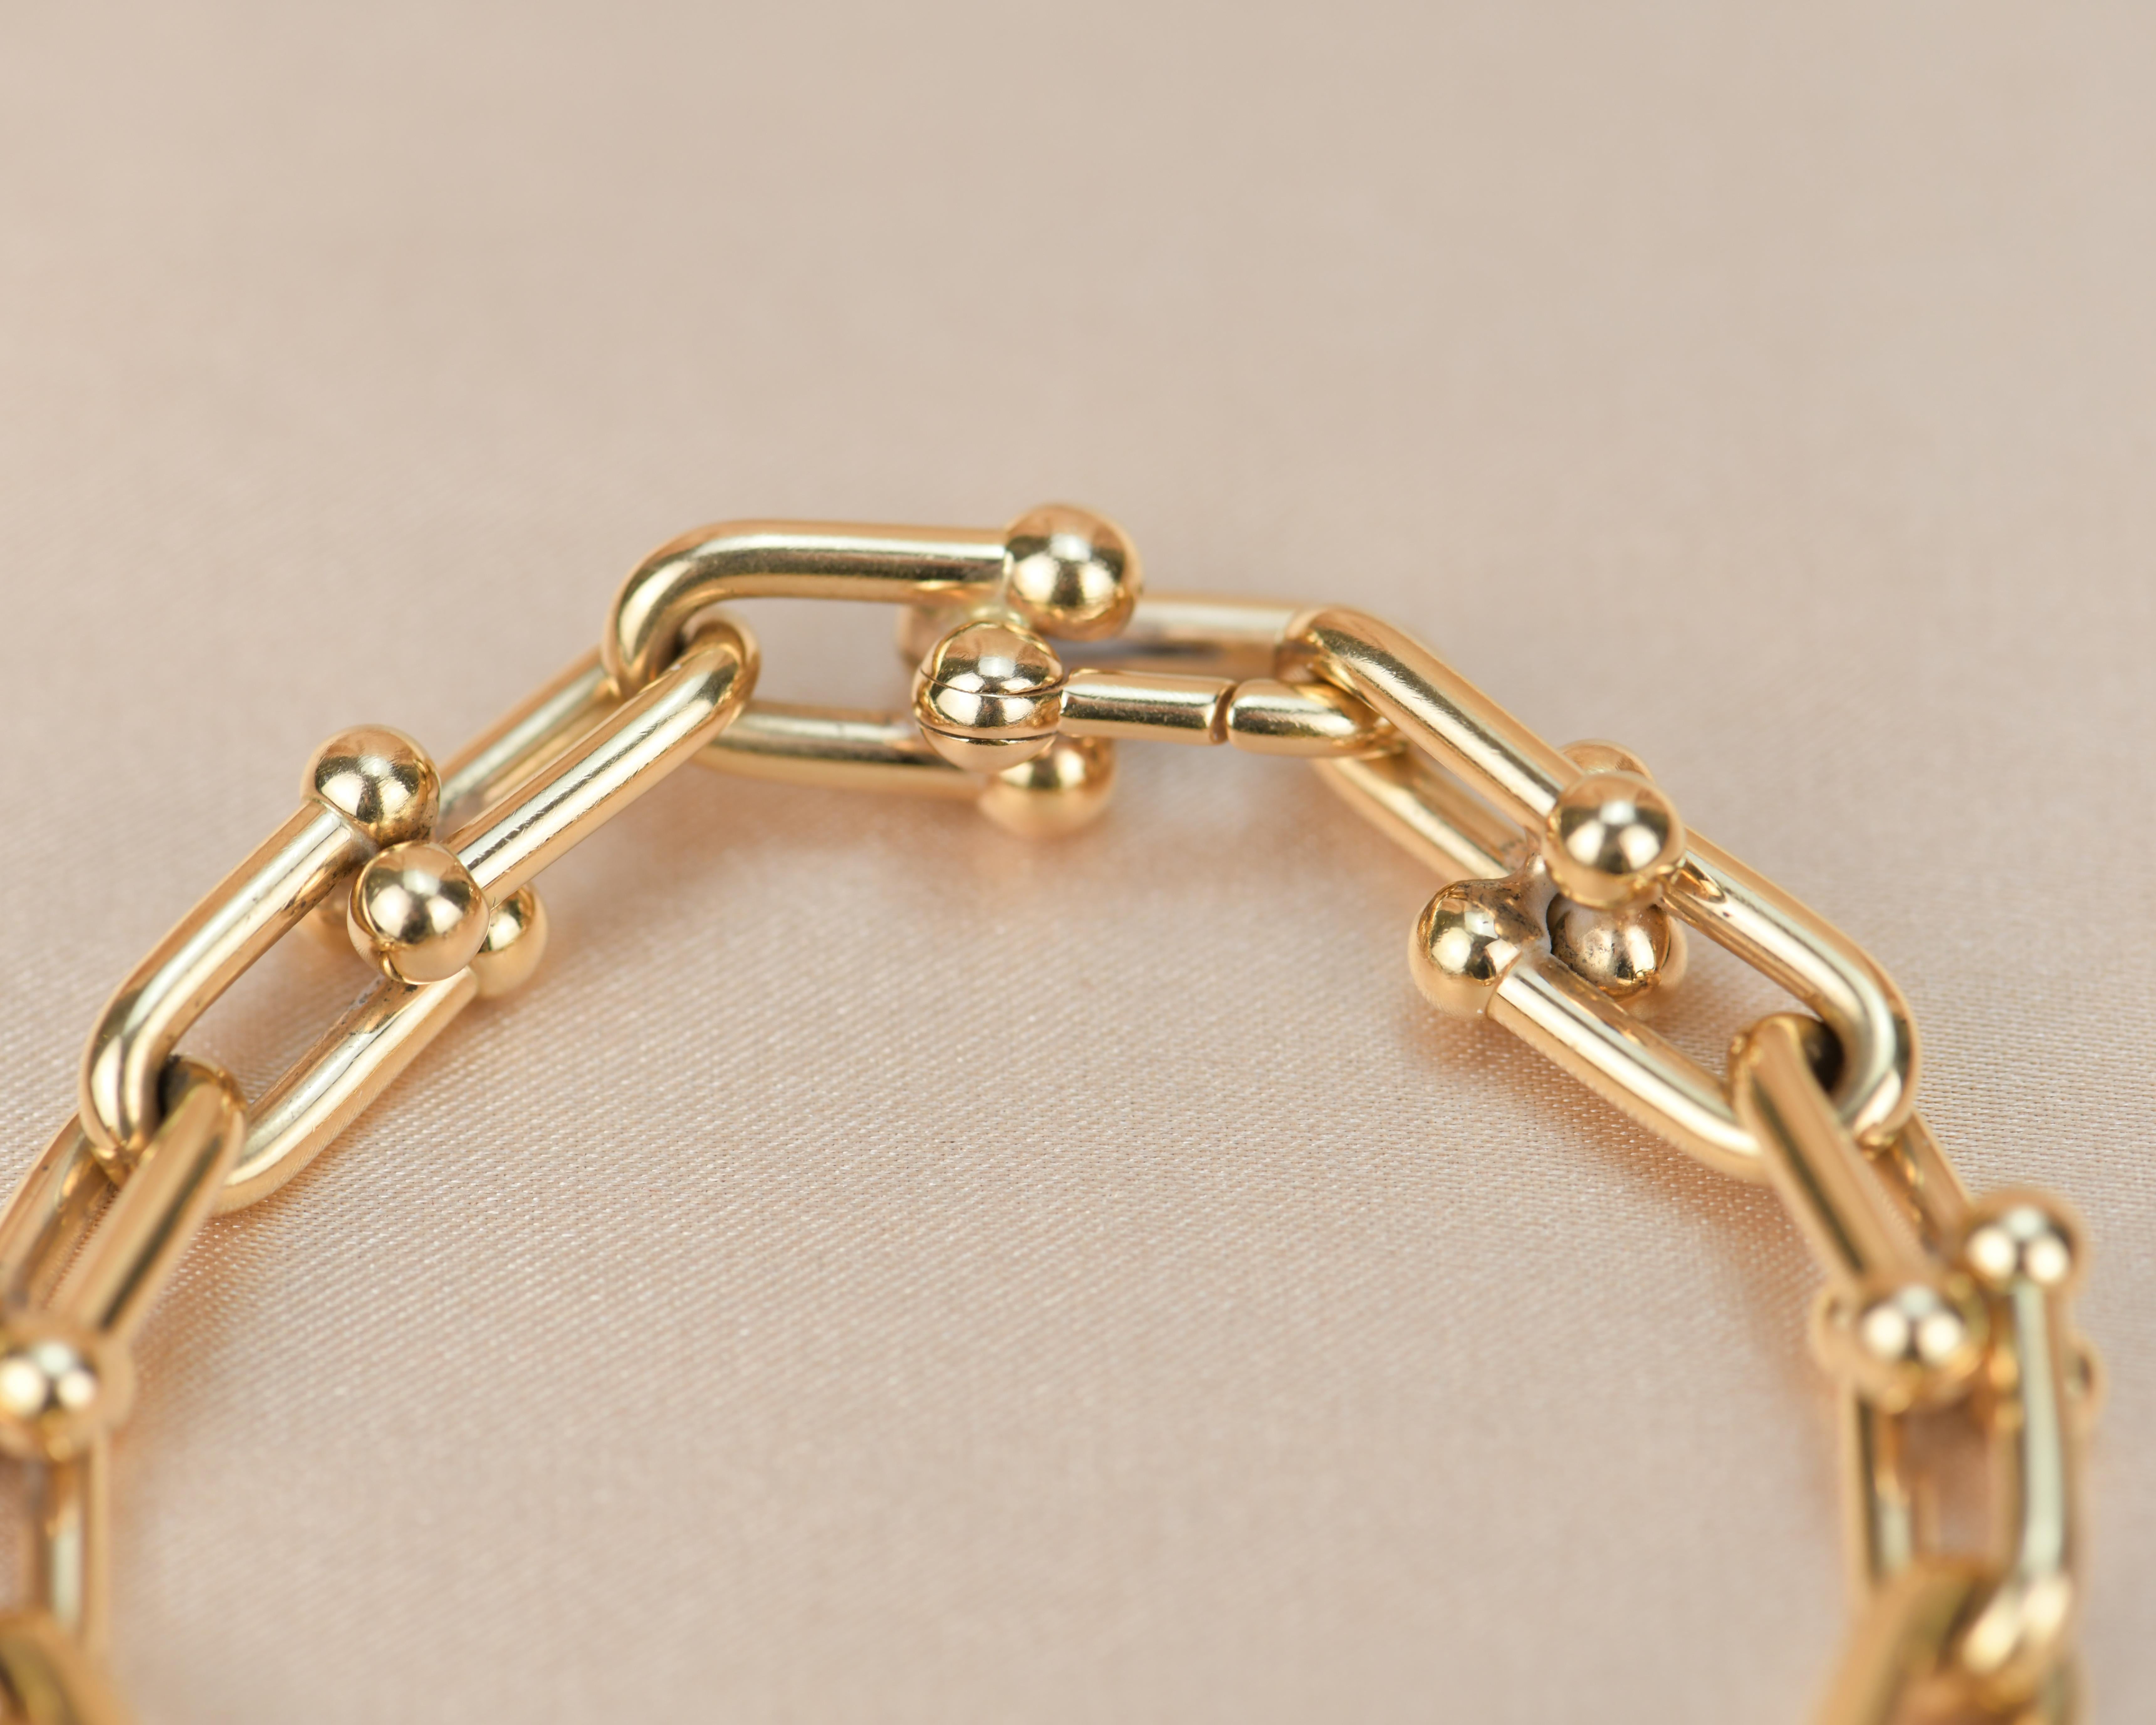 Tiffany & Co. City Hardwear Link 18K Gold Bracelet In Excellent Condition For Sale In Banbury, GB